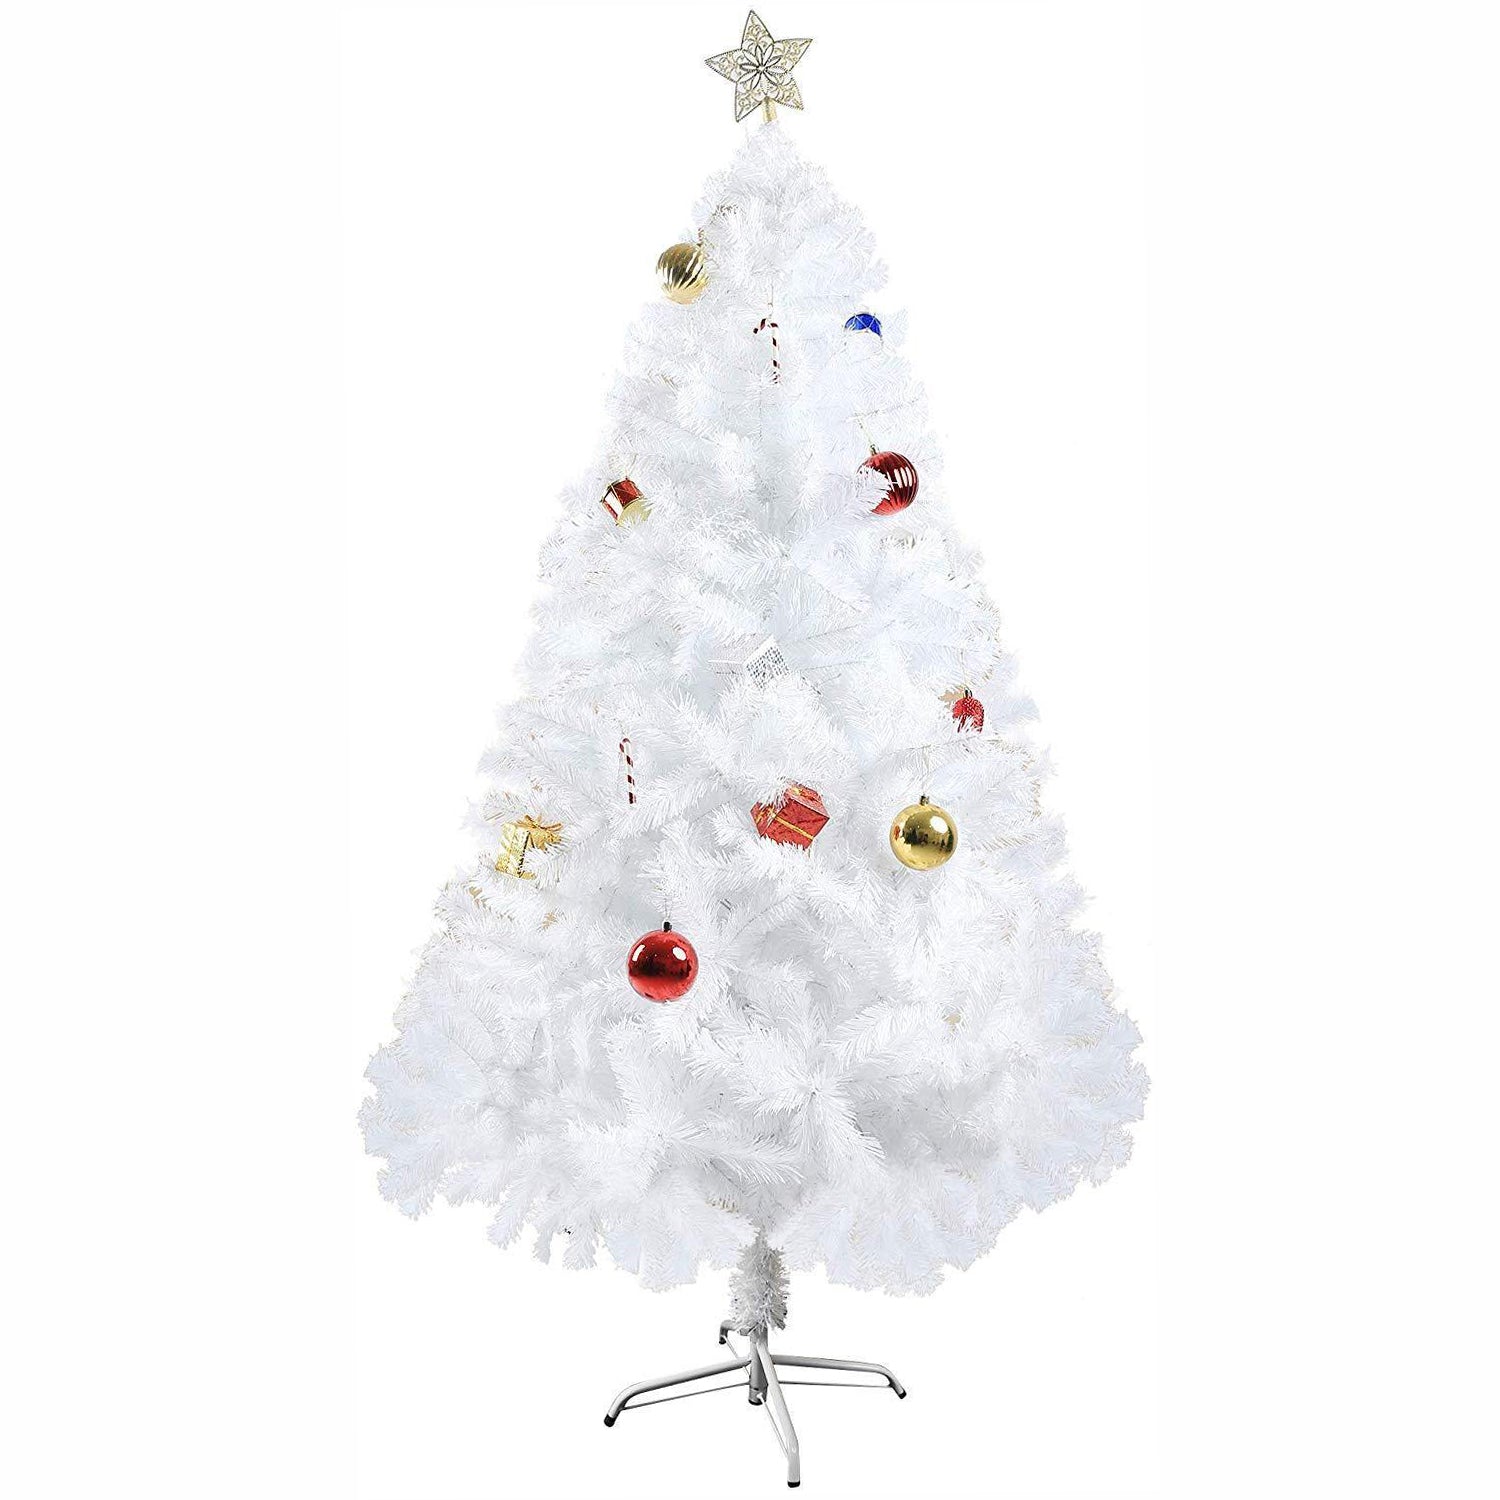 6ft Premium Artificial Christmas Spruce Tree 800 Branch Tips w/Metal Stand, White